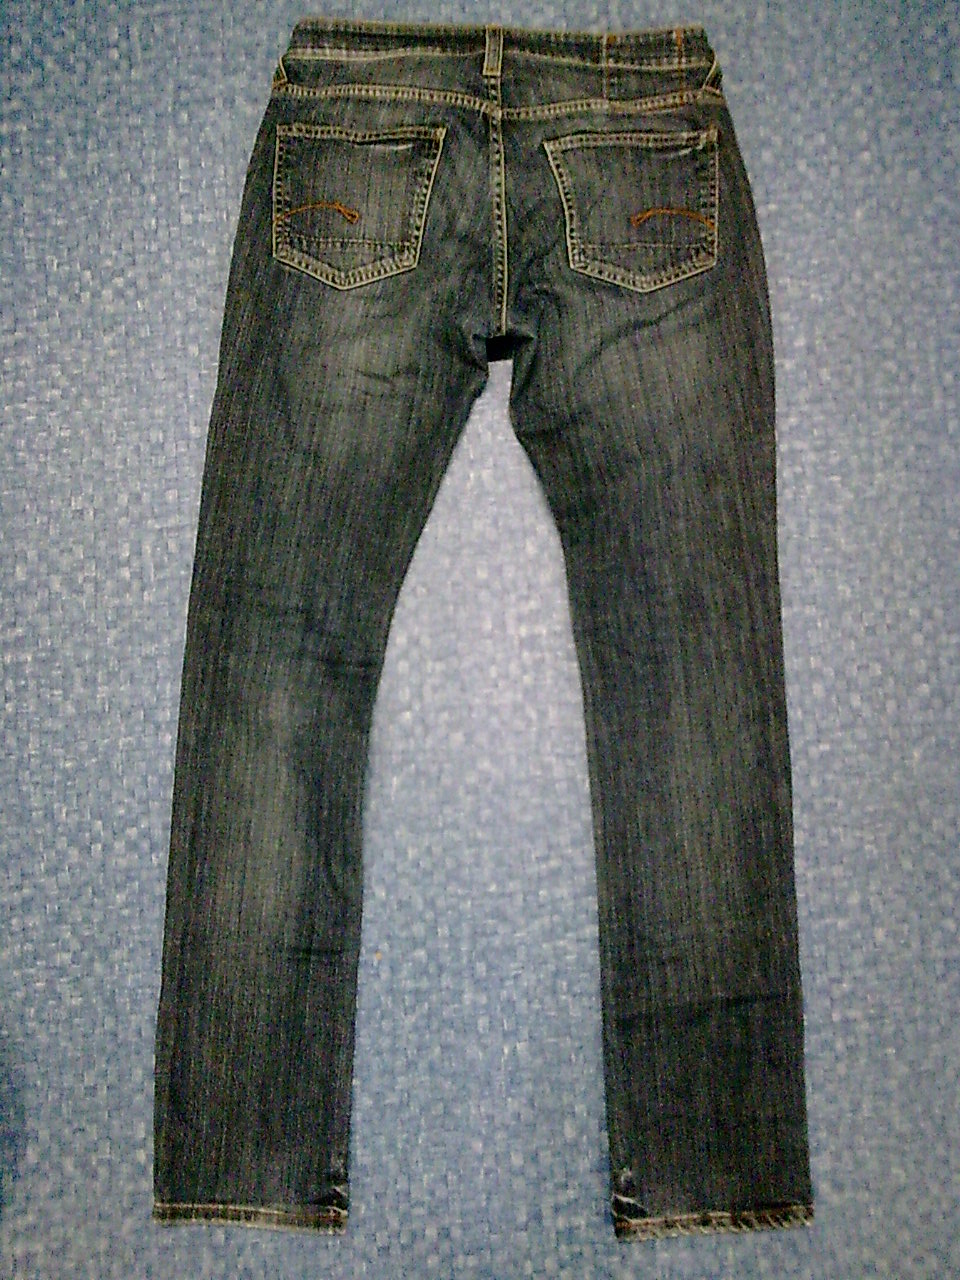 G-STAR CORE SEC SKINNY JEANS SIZE 32 (SOLD) ~ different class bundle